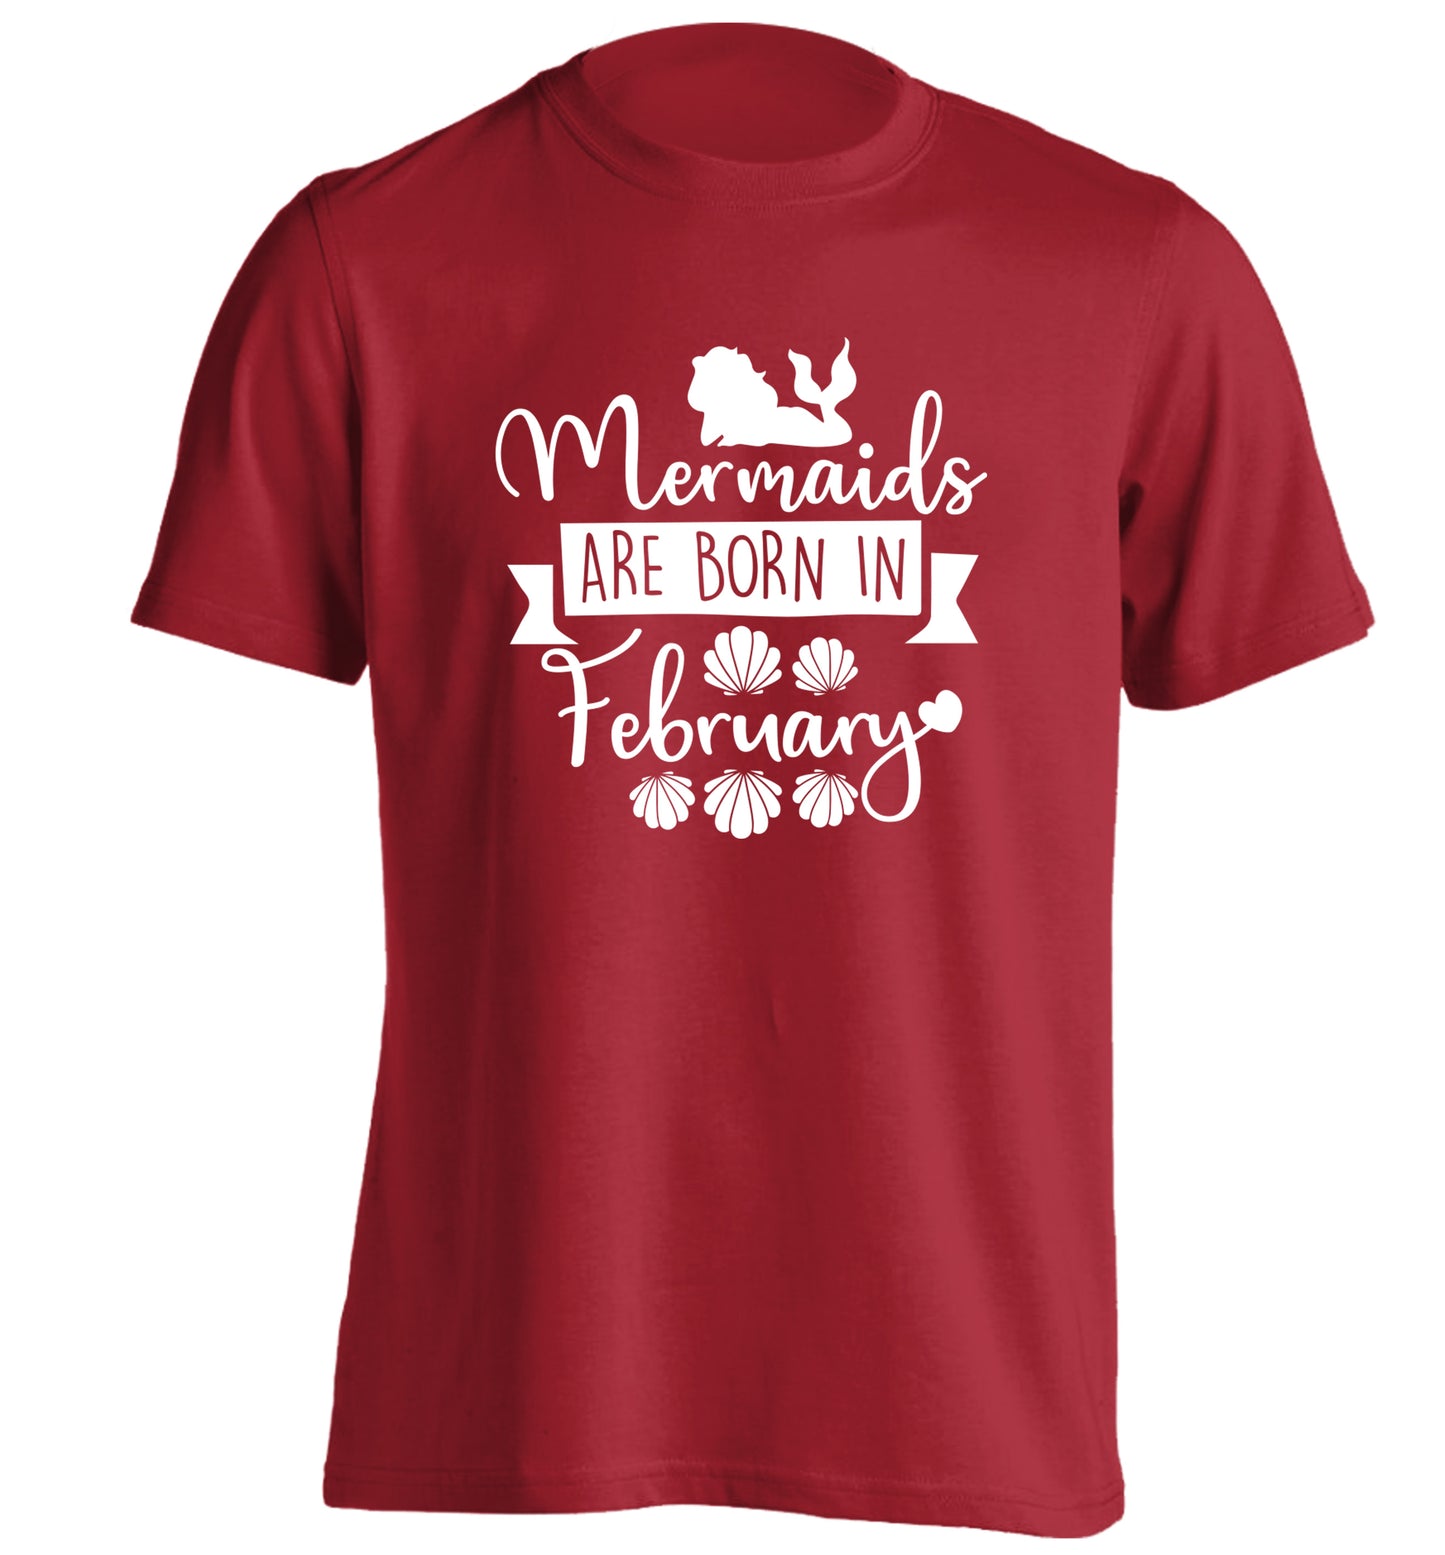 Mermaids are born in February adults unisex red Tshirt 2XL